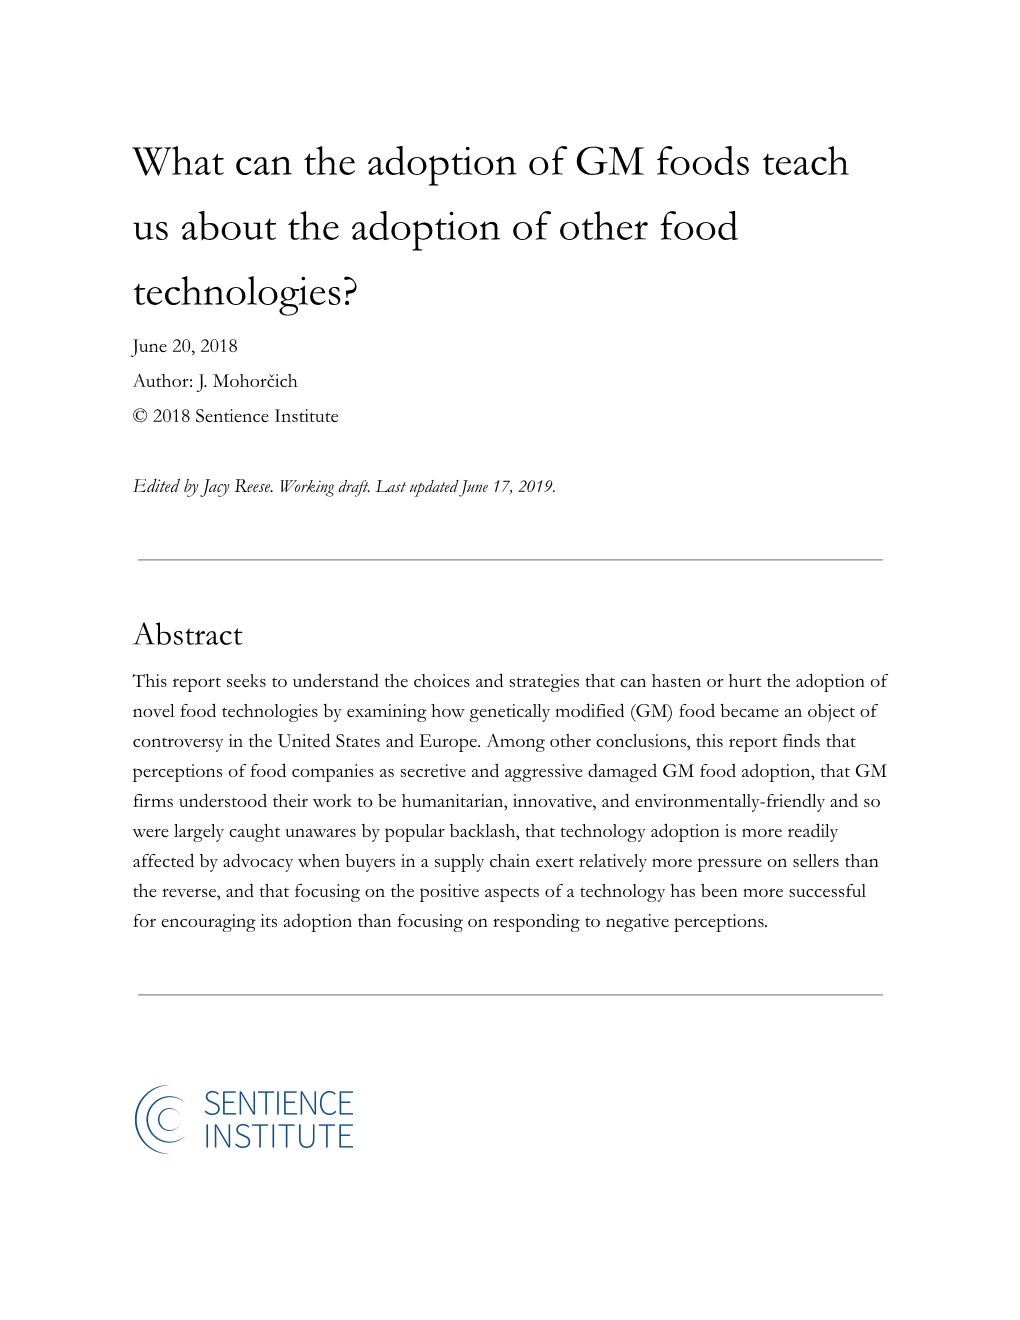 What Can the Adoption of GM Foods Teach Us About the Adoption of Other Food Technologies?